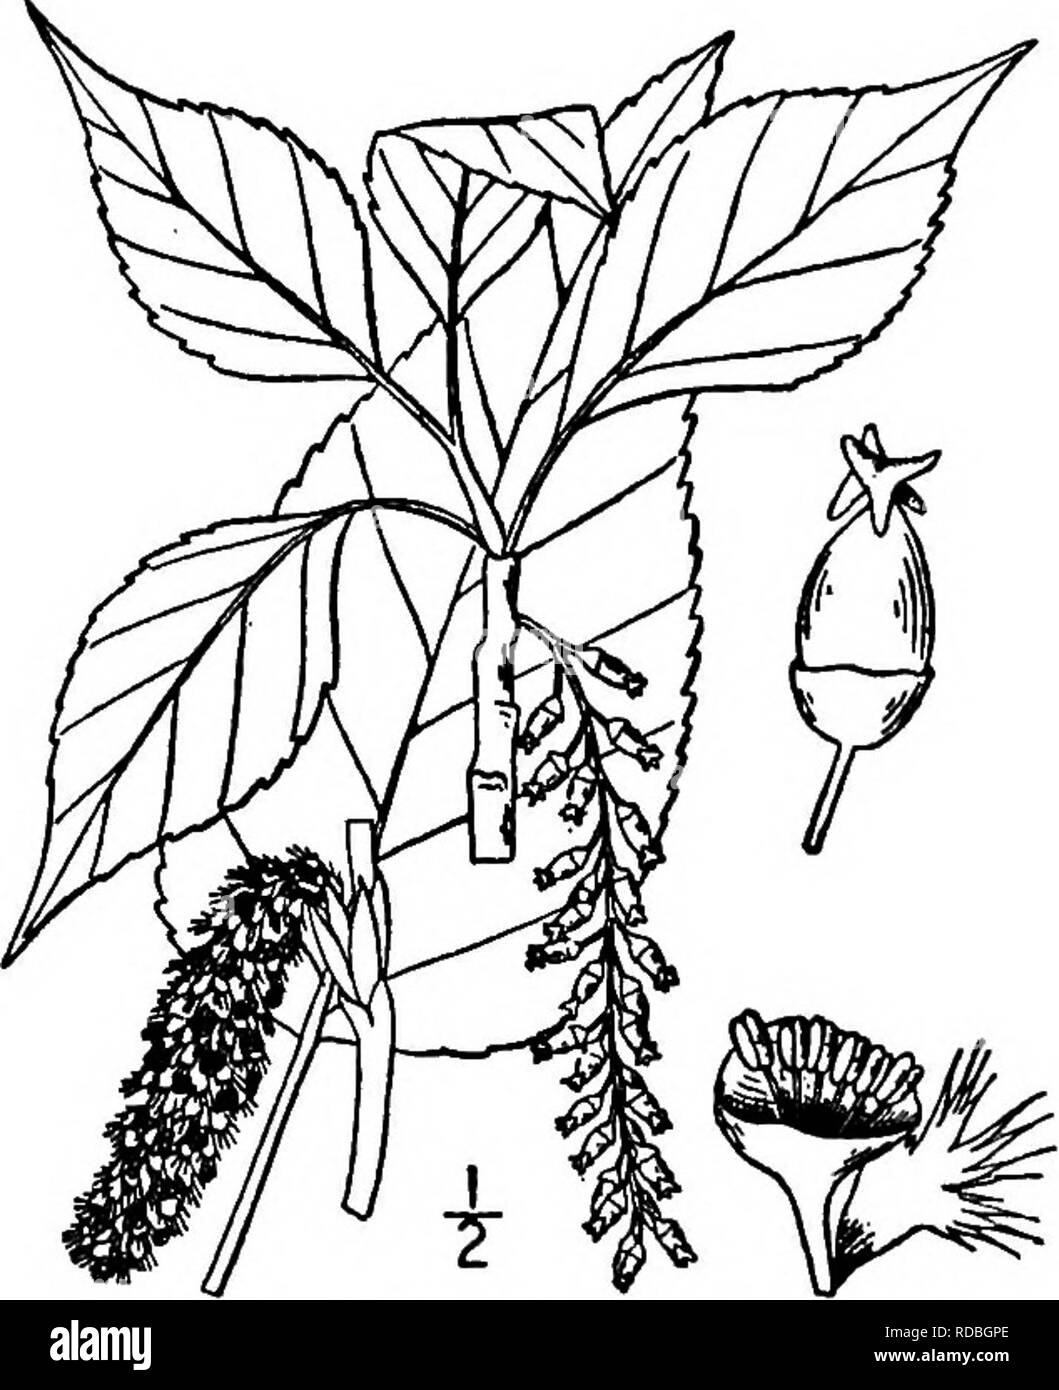 . North American trees : being descriptions and illustrations of the trees growing independently of cultivation in North America, north of Mexico and the West Indies . Trees. Balsam Poplar 171 The old bark is thick, brown, and strongly ridged, that of young stems pale gray or nearly white, and smooth or nearly so. The young twigs are slender, smooth, brown, and round or somewhat angled. The buds are brown and very resinous, pointed, about I cm. long. The leaves are rhombic- lanceolate, 5 to 15 cm. long, rather abruptly long-pointed, nearly equally bluntly toothed, except near the base and apex Stock Photo